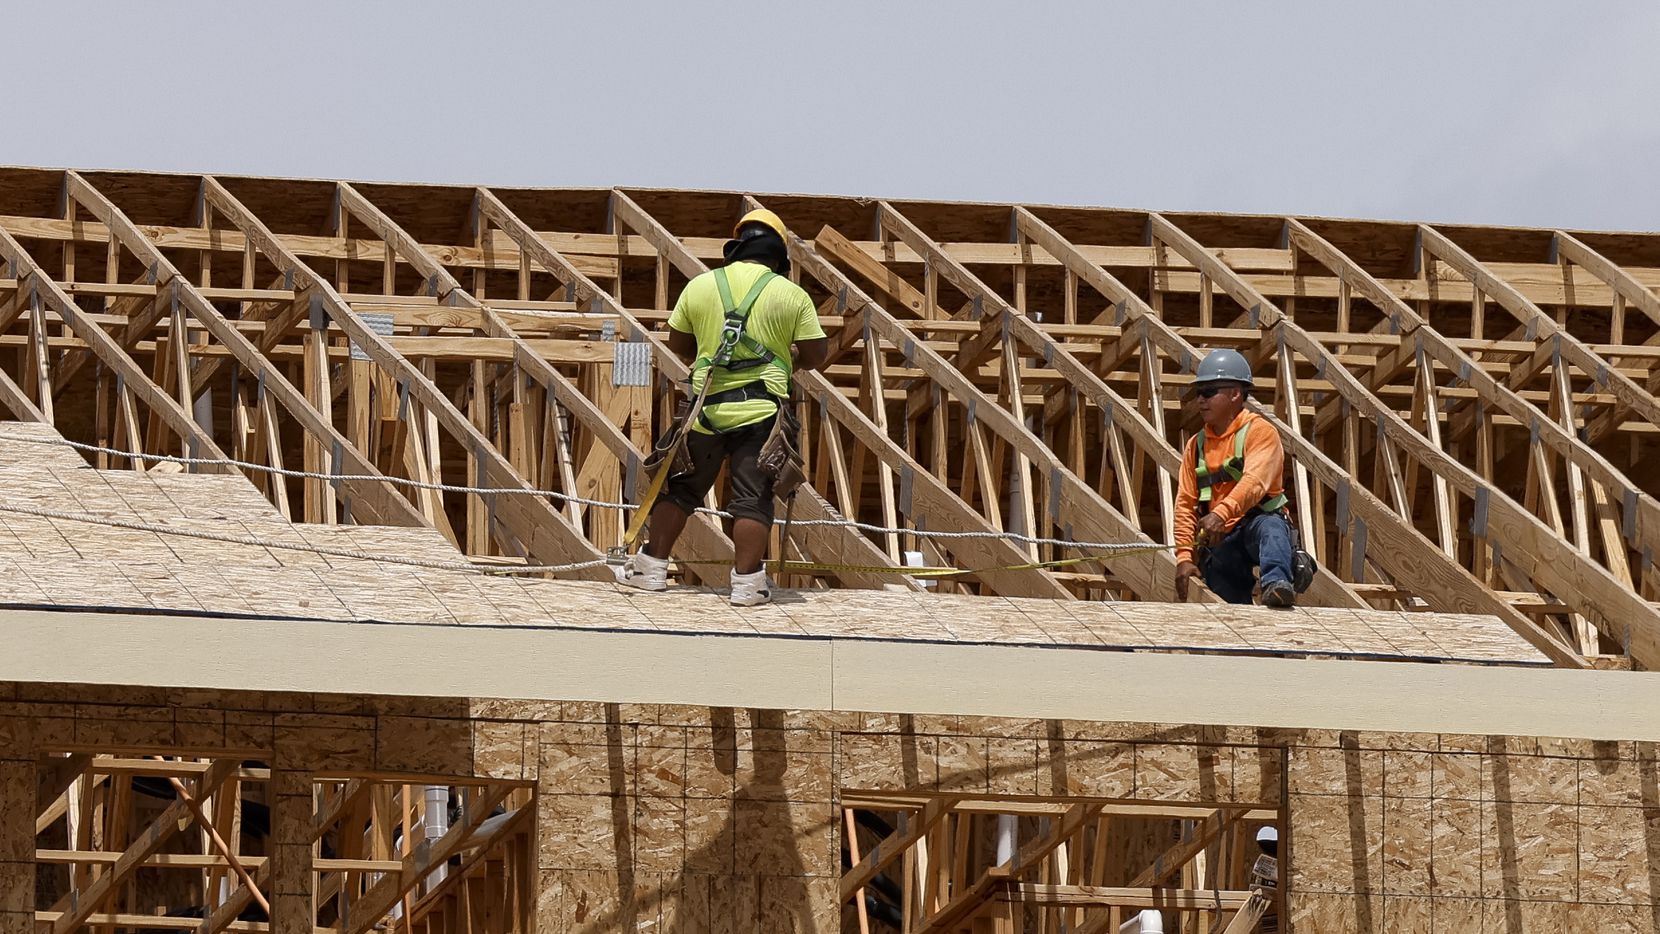 More than 50,000 apartments are under construction in North Texas.